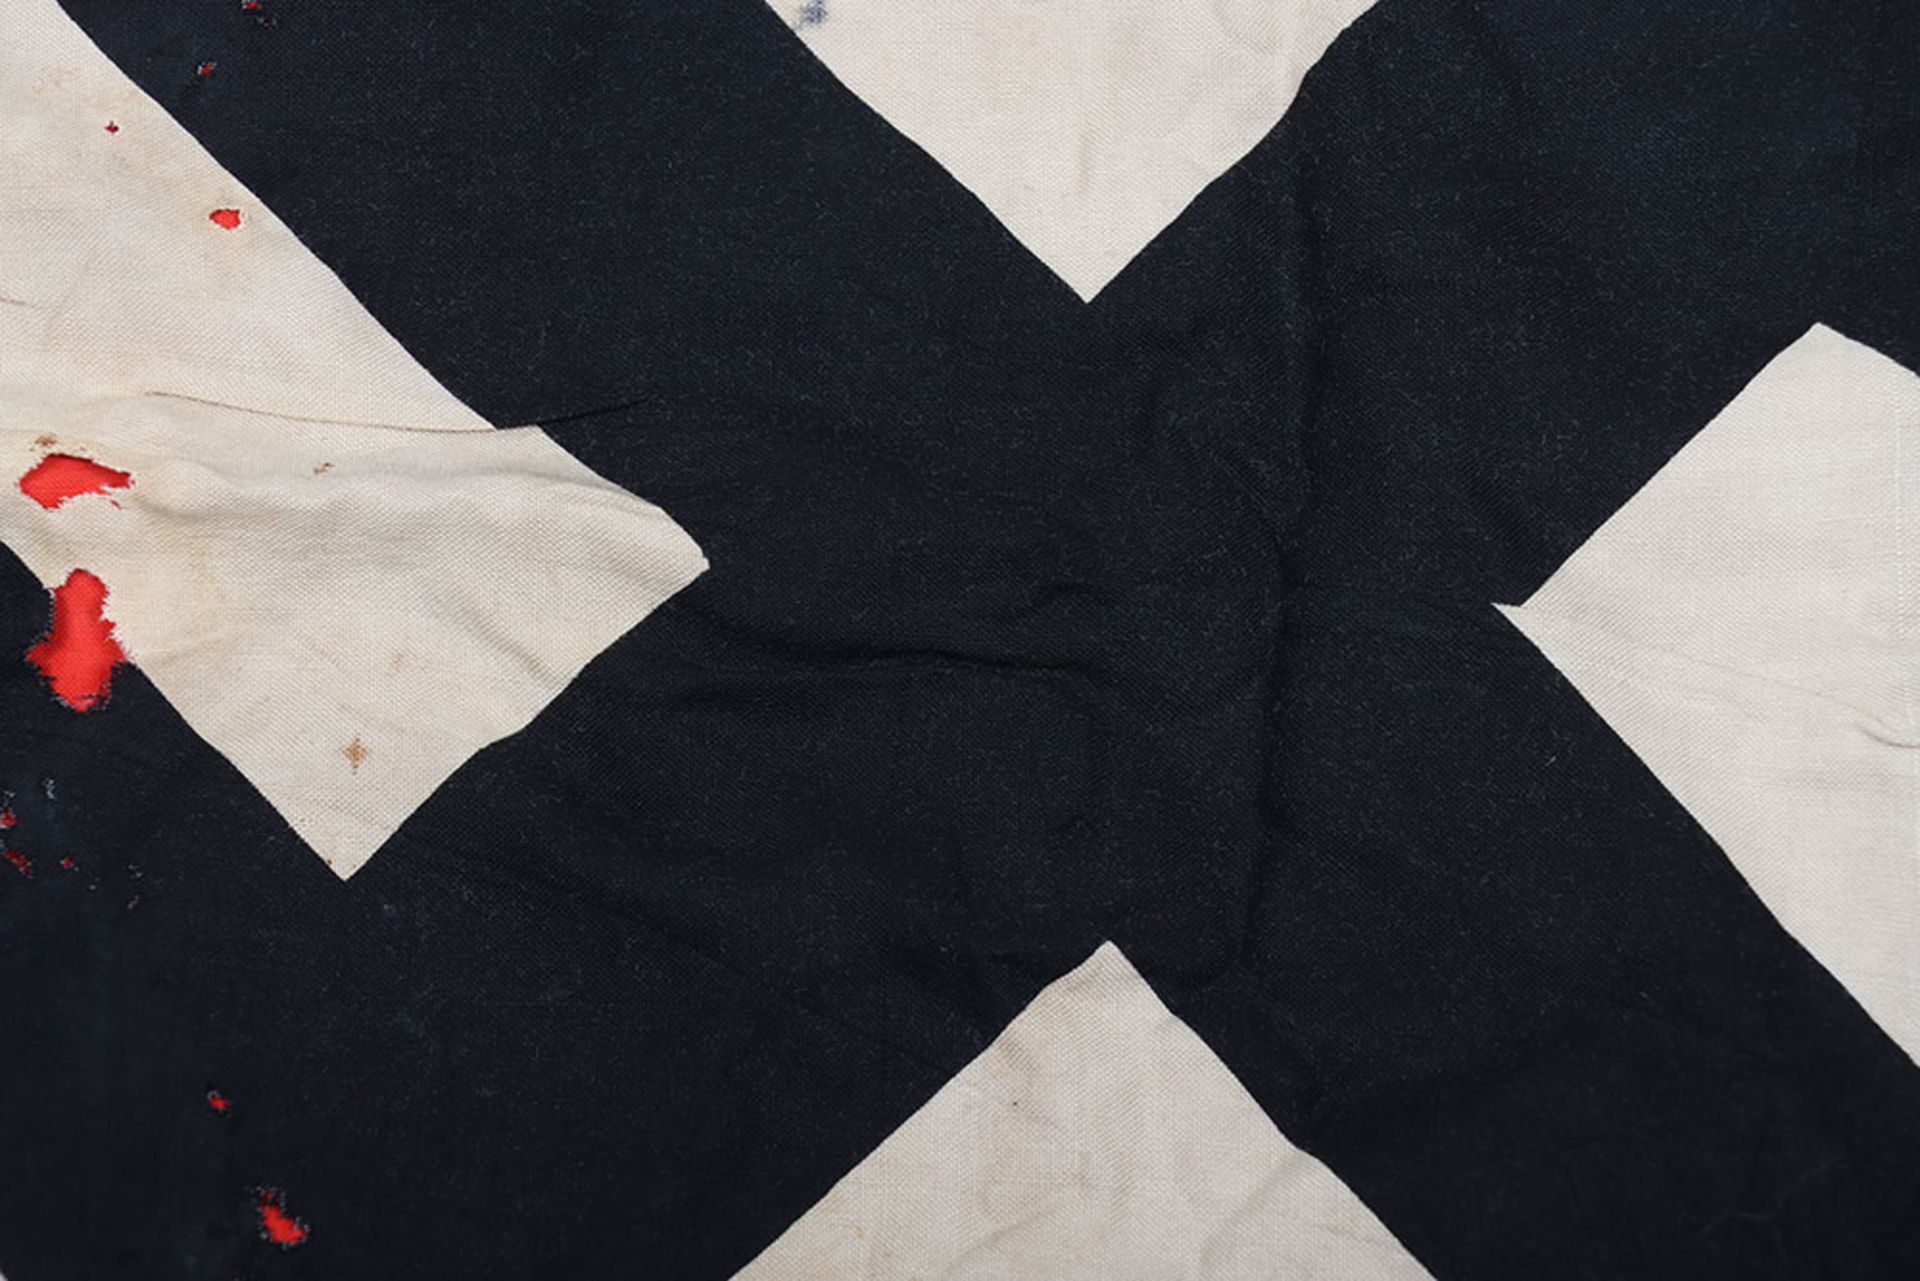 WW2 German Flag Reputed to Have Been Captured on Omaha Beach D-Day 6th June 1944 - Bild 4 aus 9